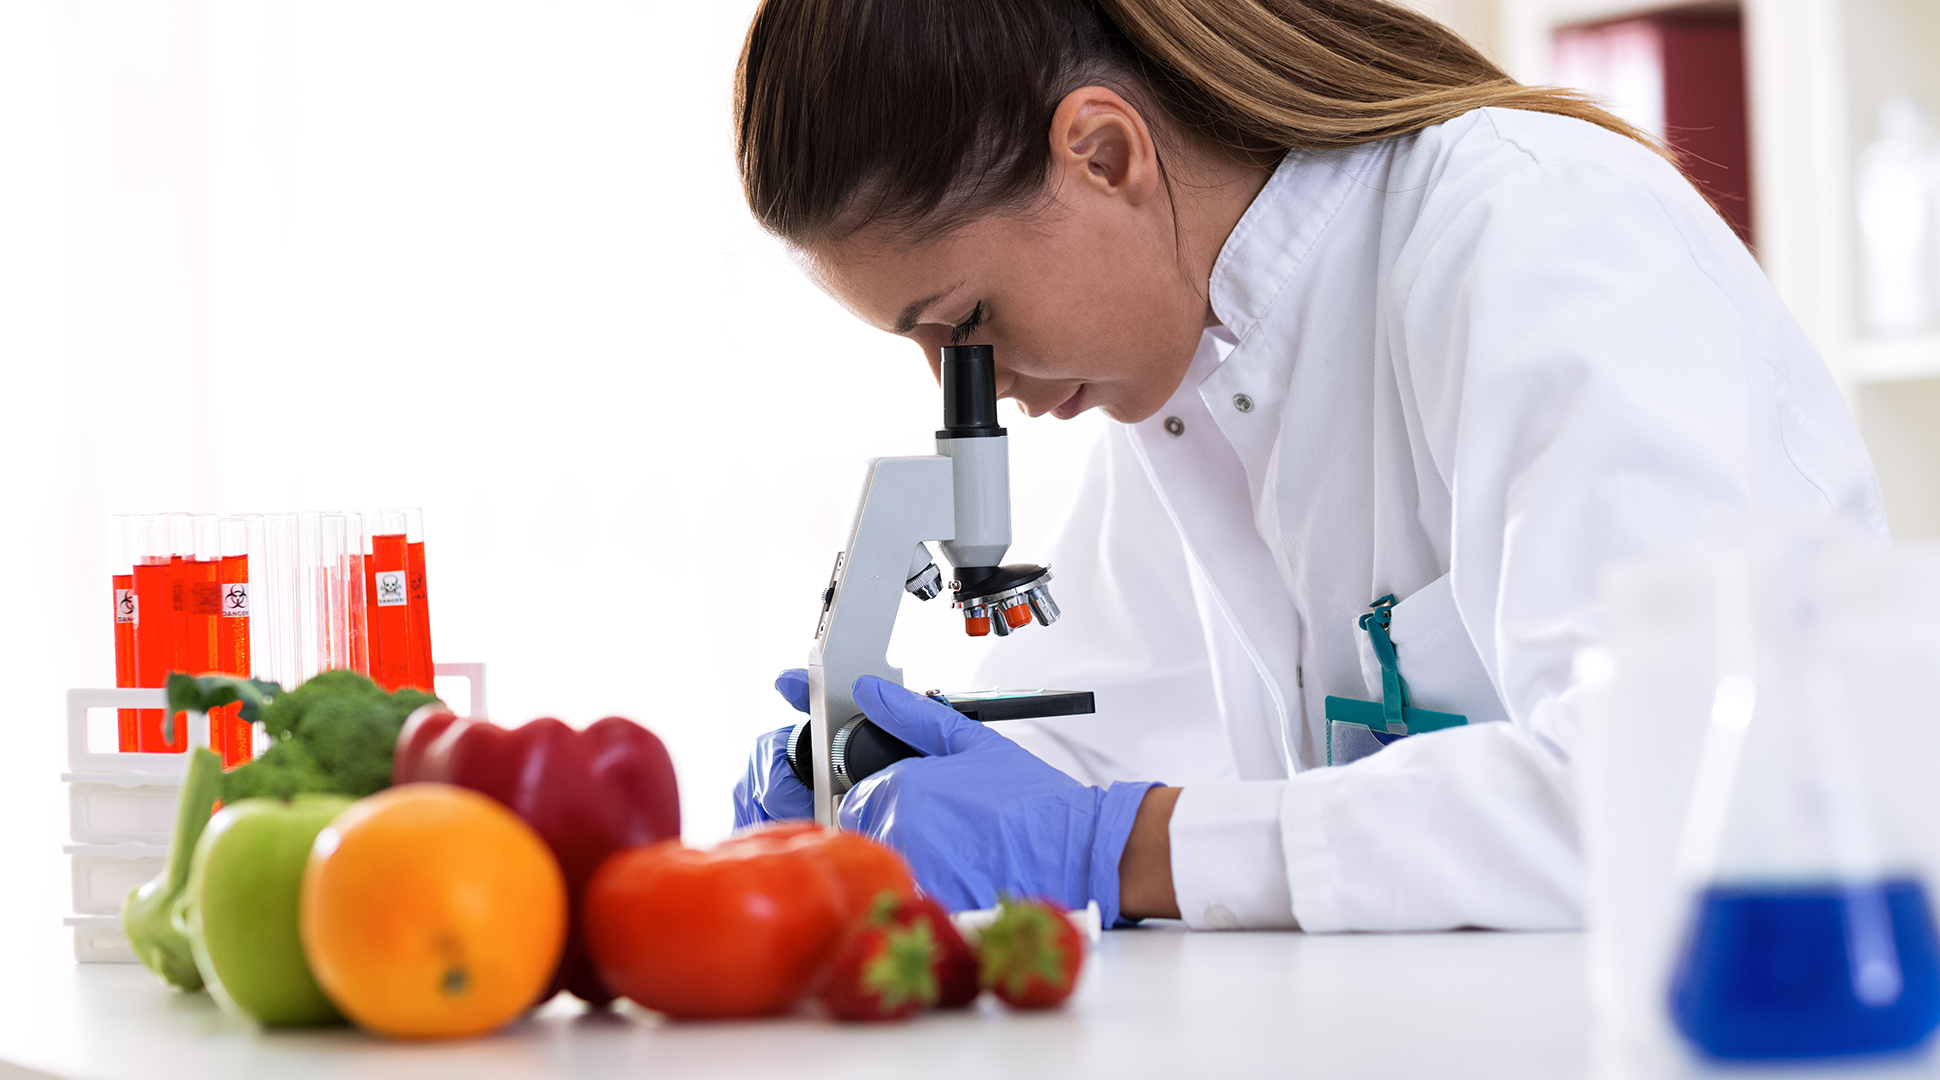 Food technology and why it matters